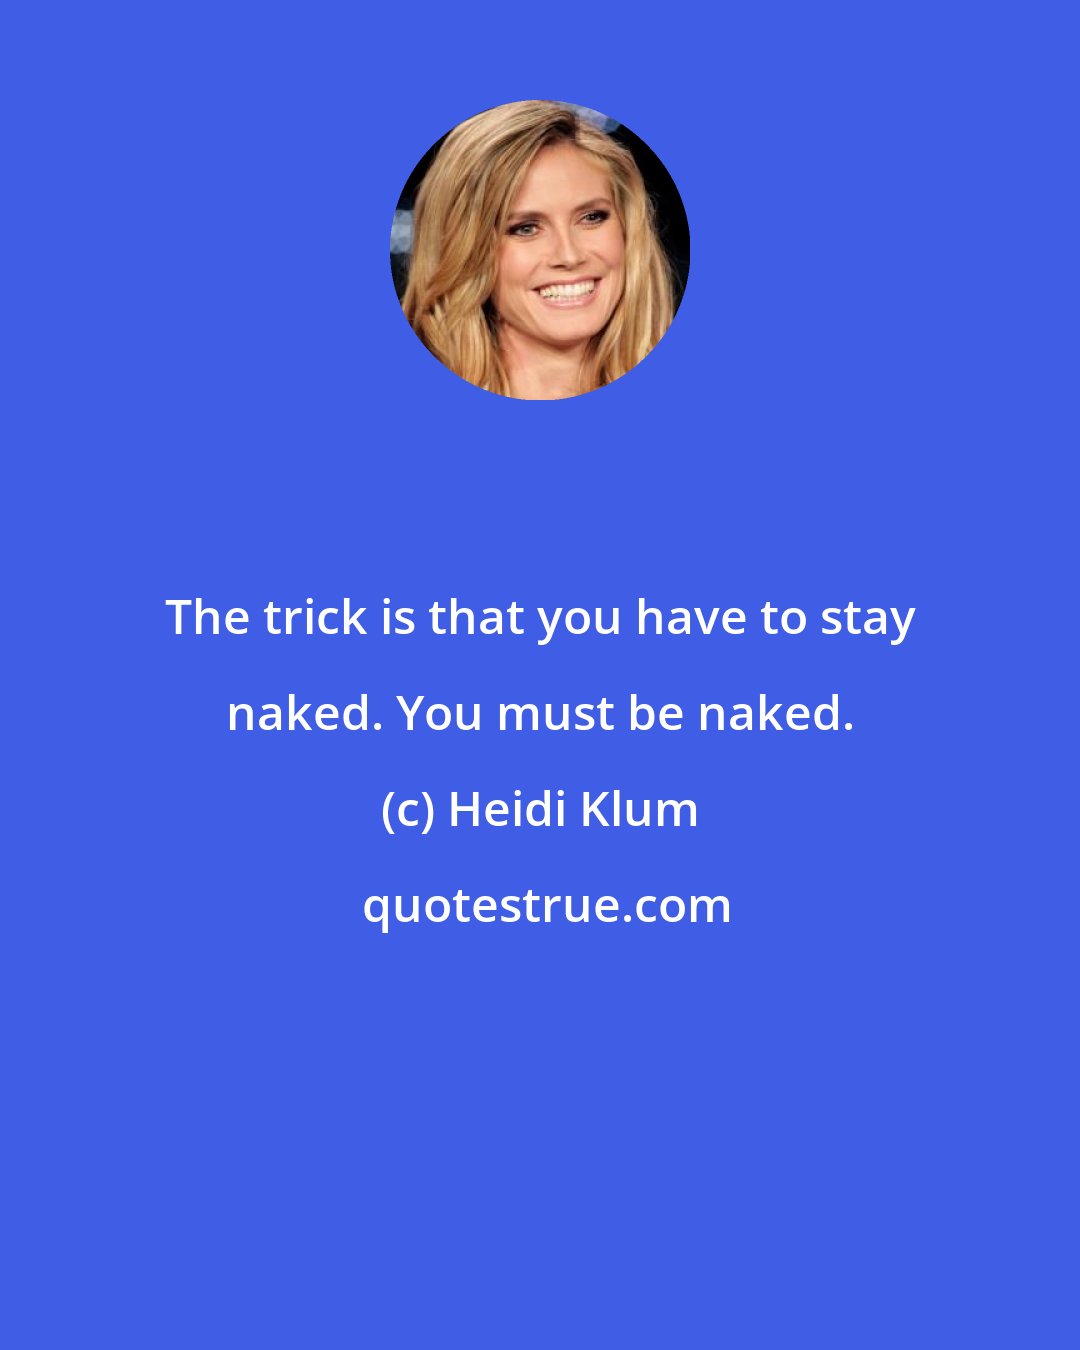 Heidi Klum: The trick is that you have to stay naked. You must be naked.